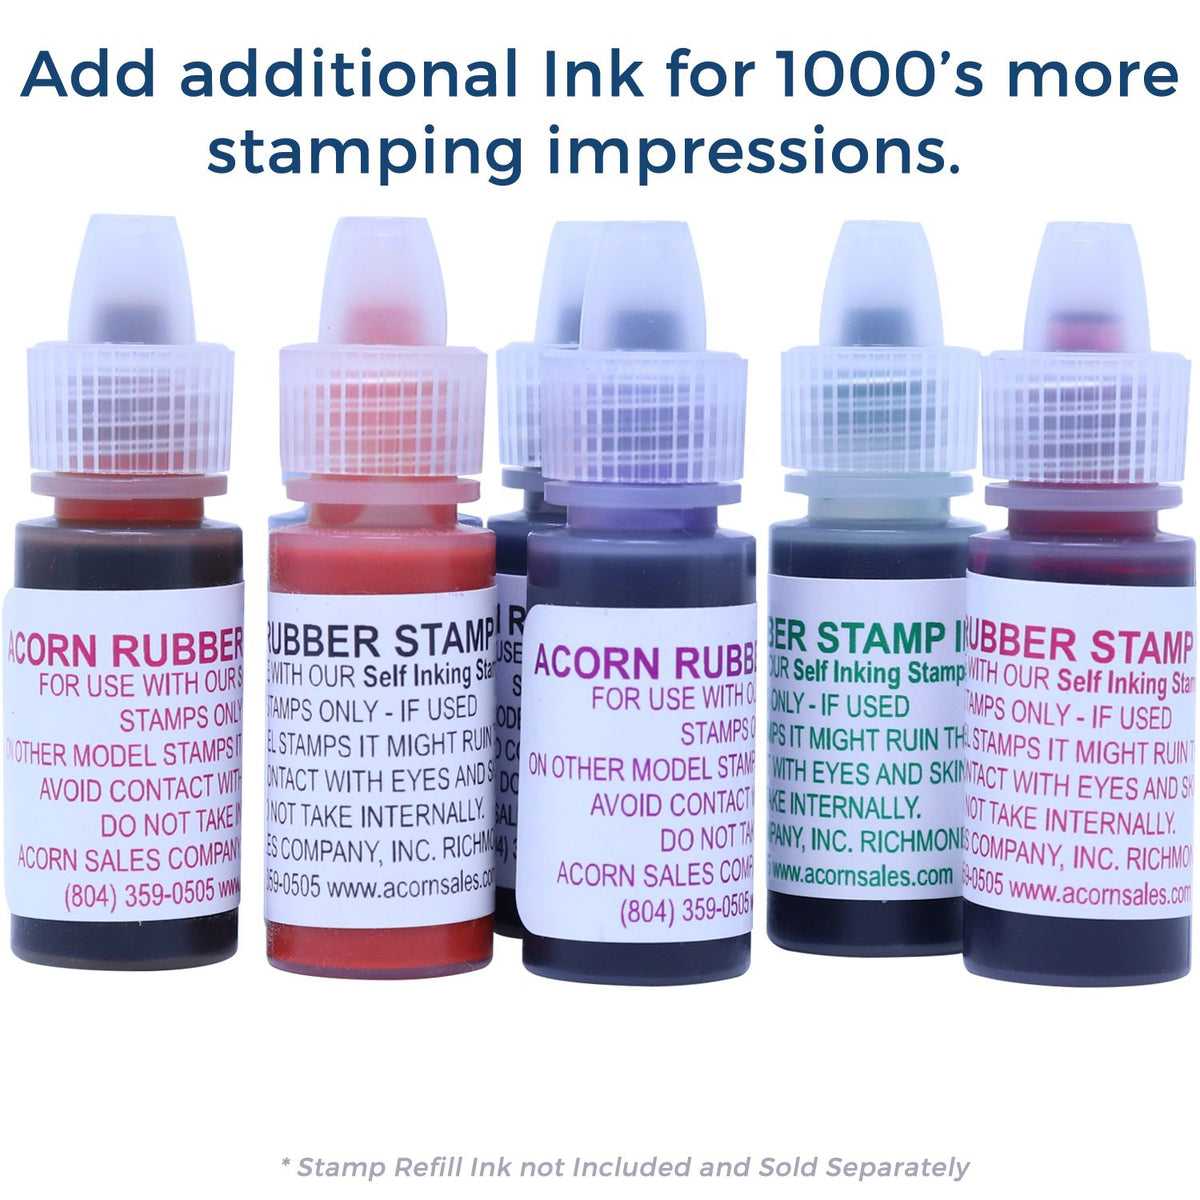 Refill Ink for Self-Inking Round Great Job Smiley Stamp Available